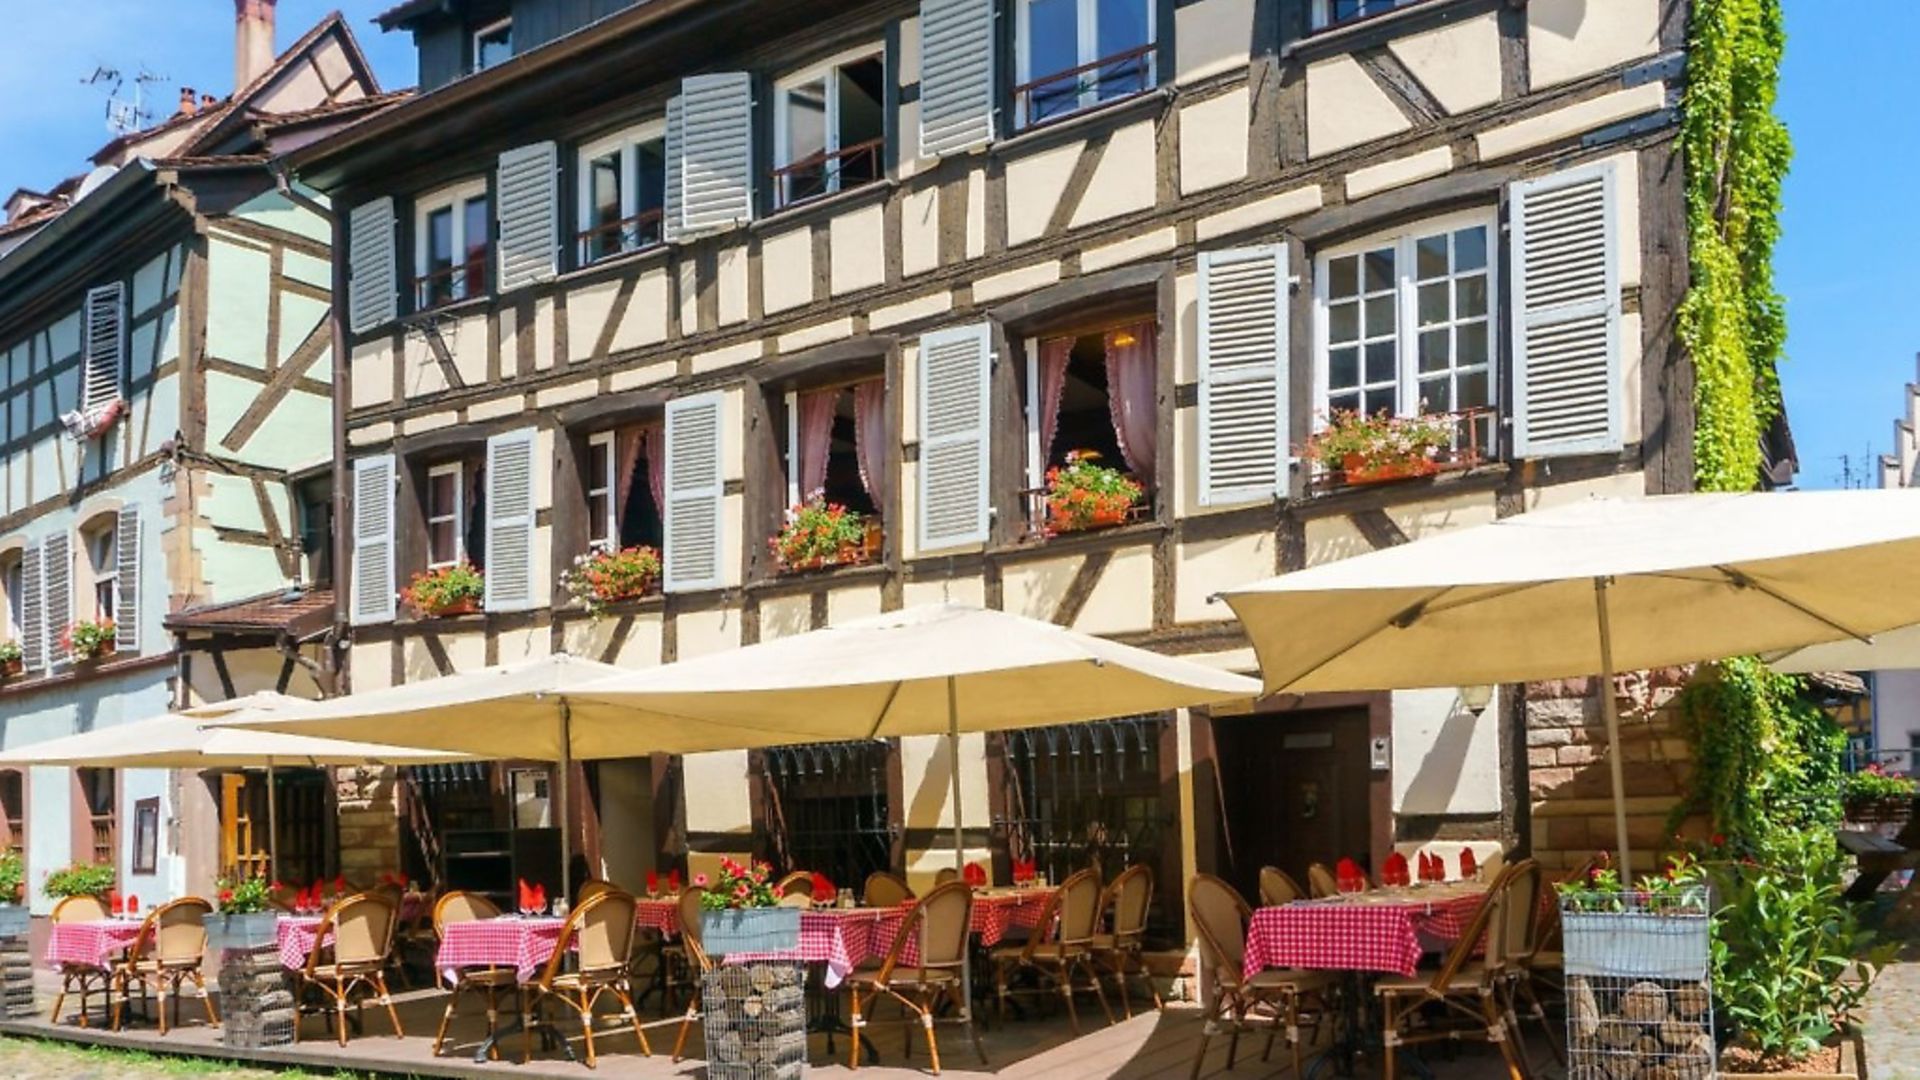 Guide to eating out in France - Complete France